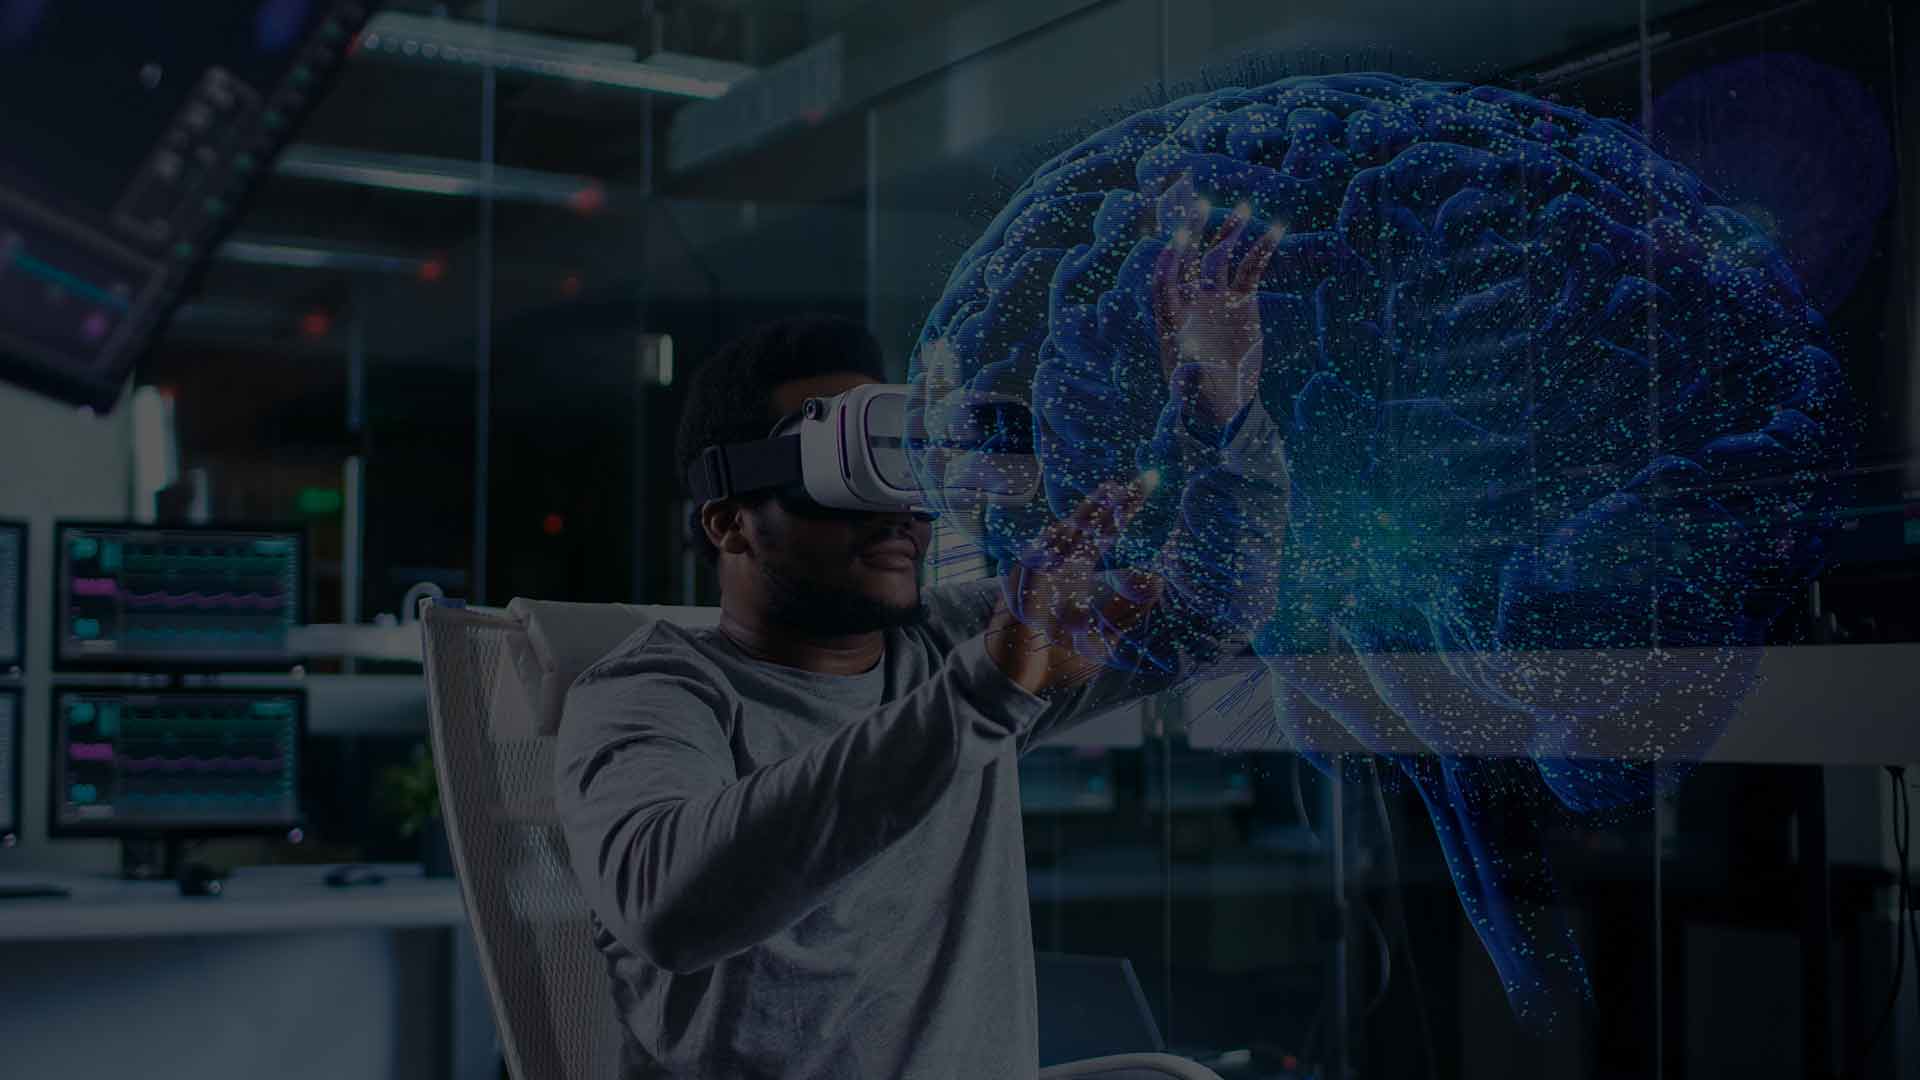 Man Interacting with Digital Brain in Virtual Reality Headset